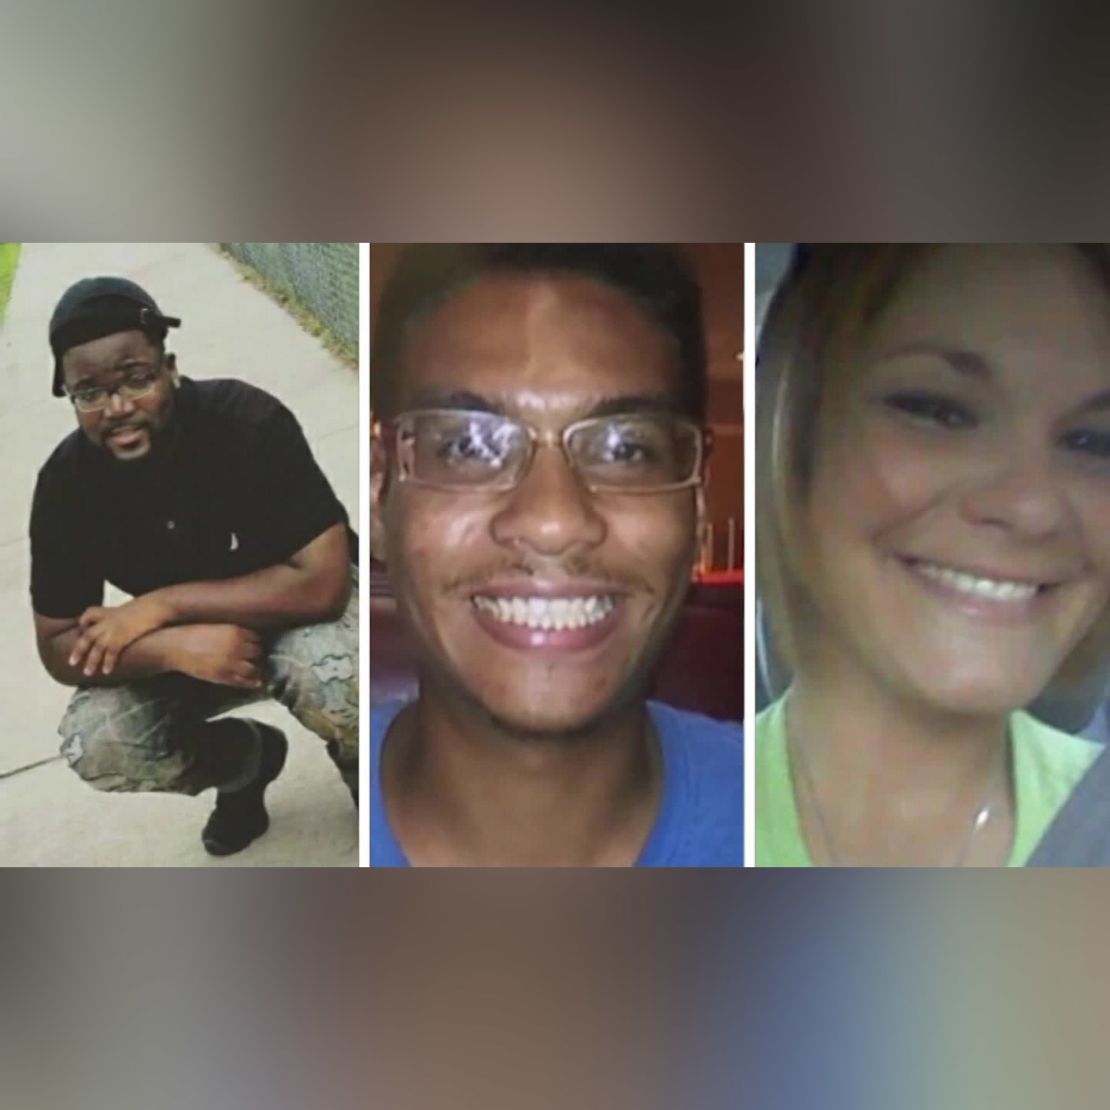 From left, Benjamin Mitchell, Anthony Naiboa and Monica Hoffa were killed within 11 days in Tampa.